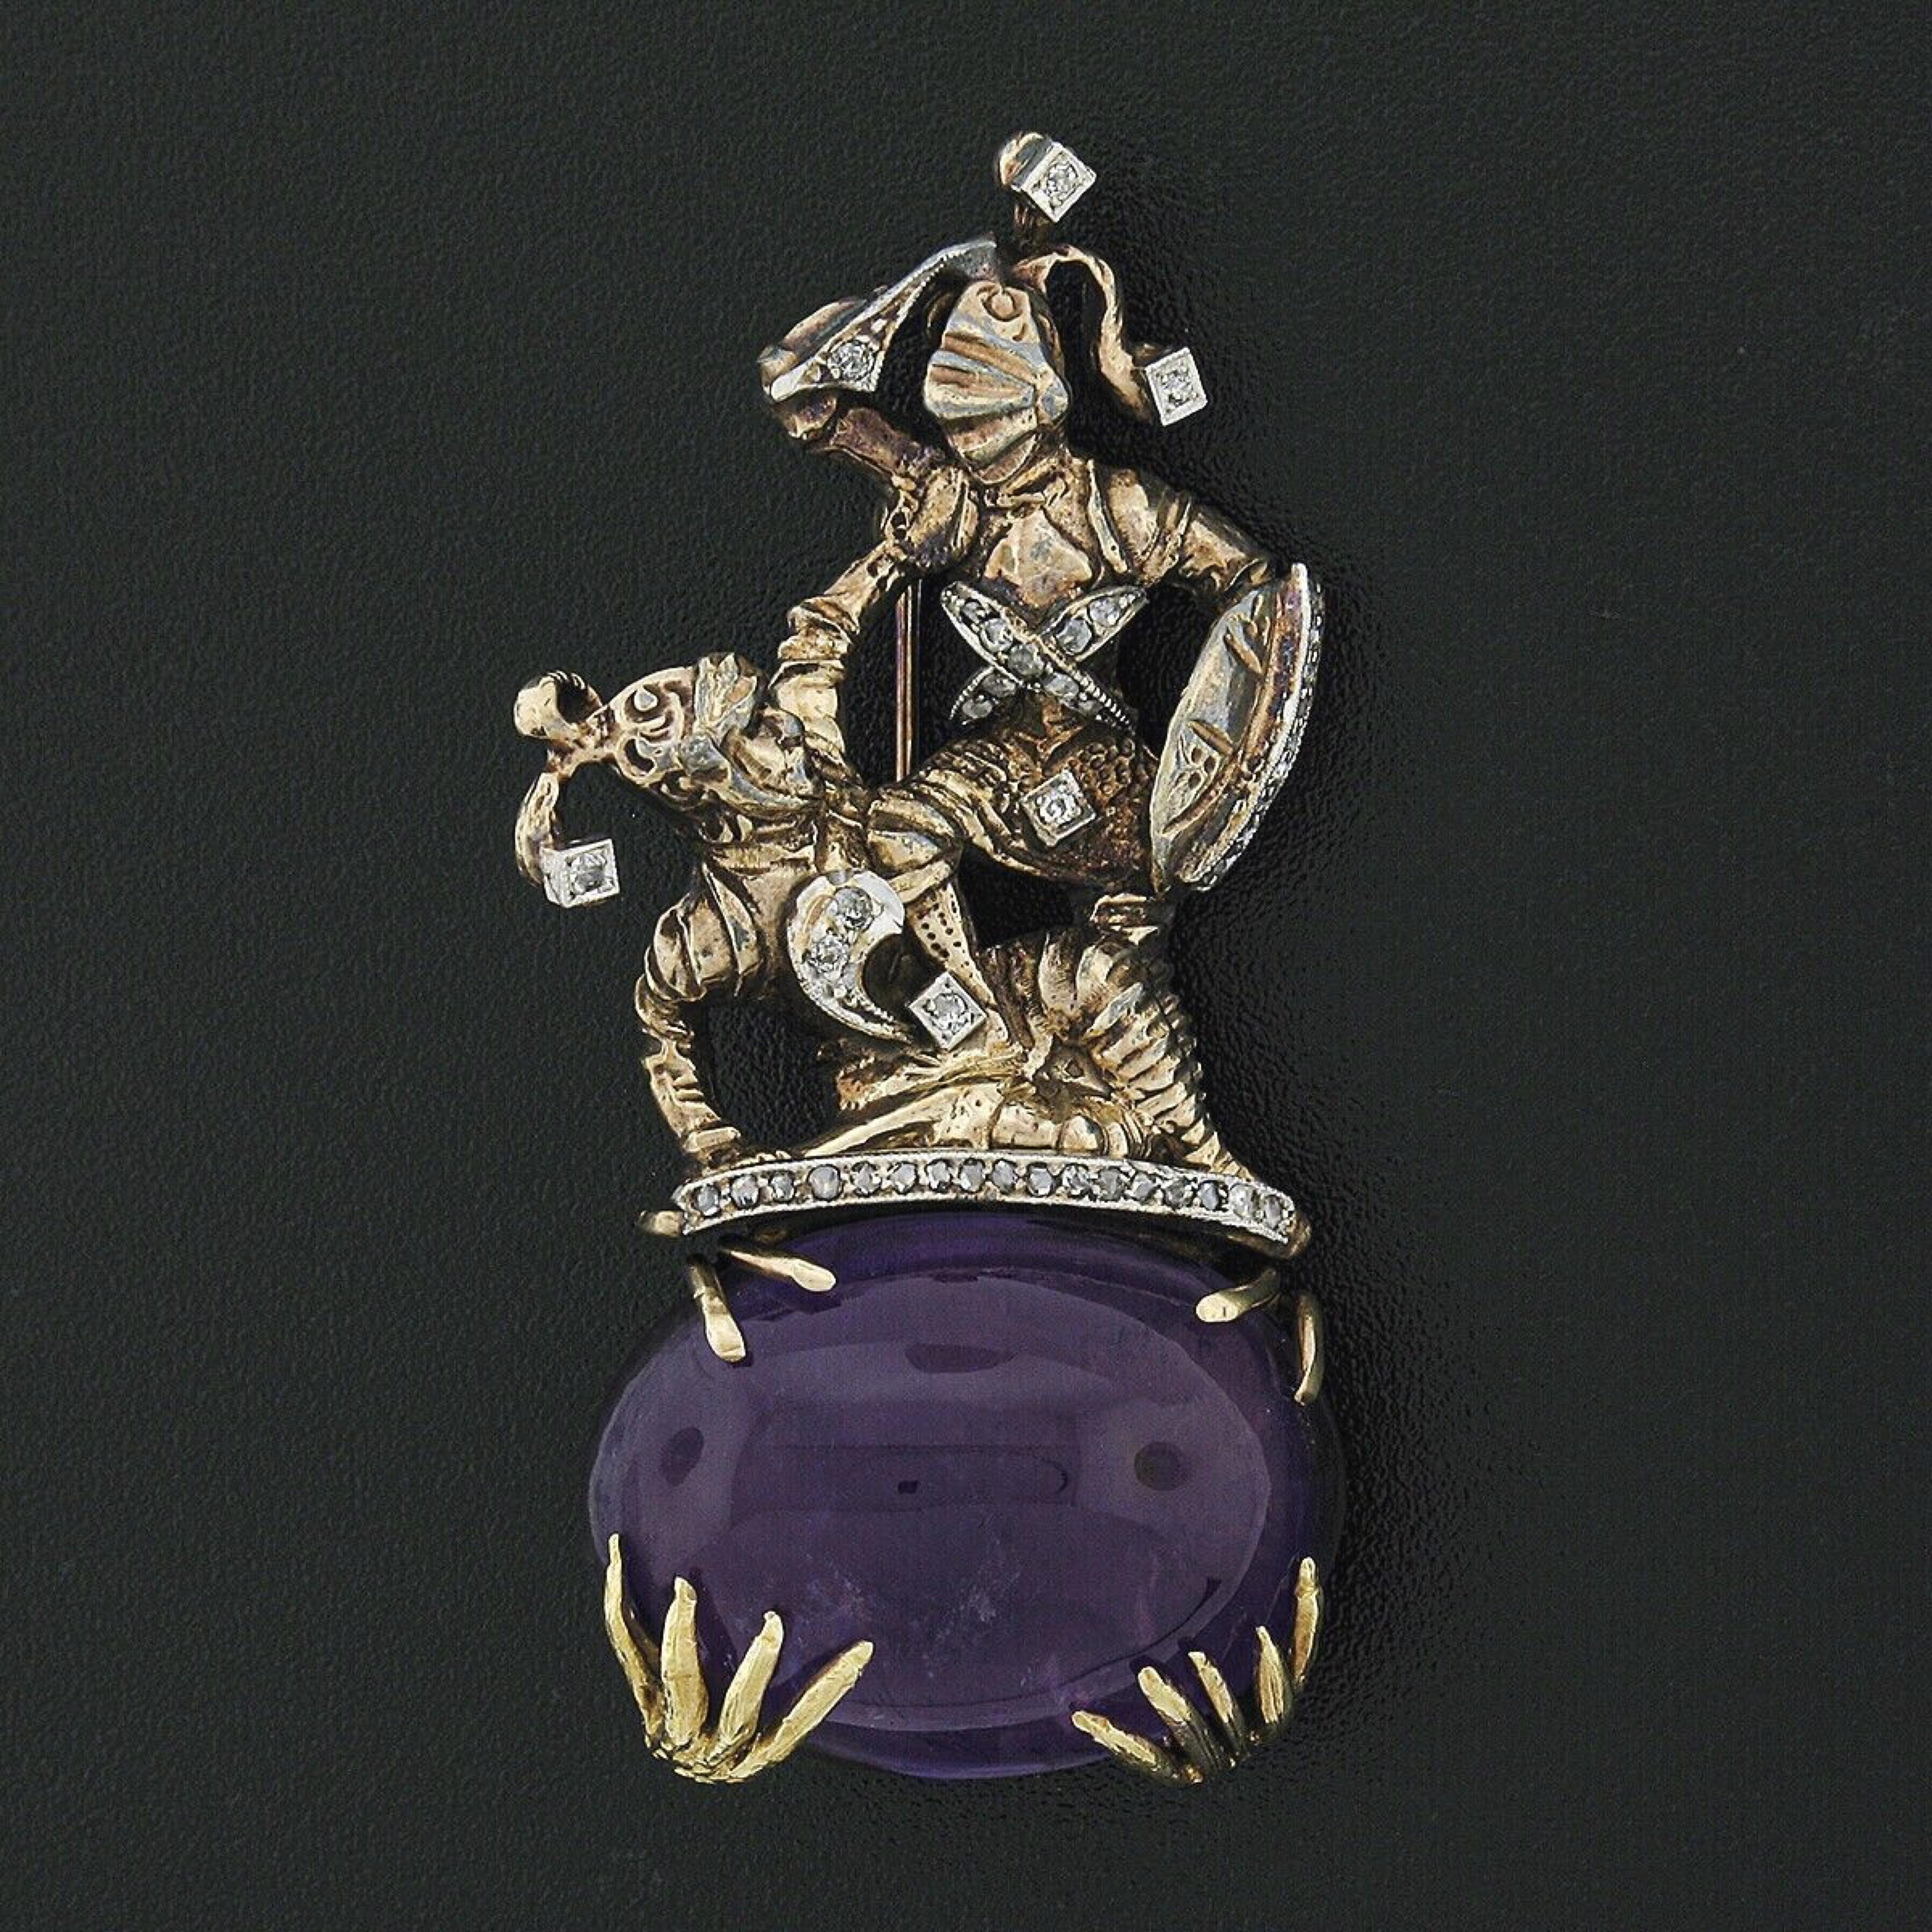 Here we have a super unique and truly magnificent antique brooch crafted from solid 14k yellow gold and platinum featuring two incredibly detailed knights fighting on top of a beautiful oval cabochon cut natural amethyst stone. The knights exhibit